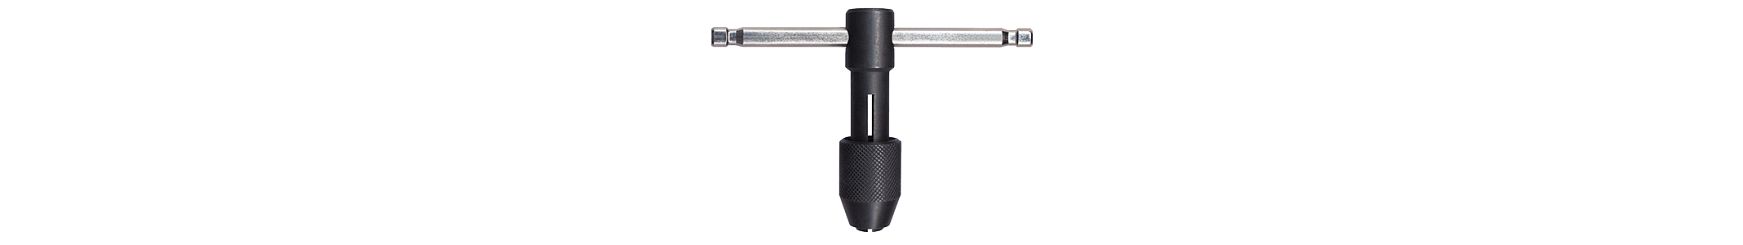 Tap Handles-T-Handle Tap Wrench